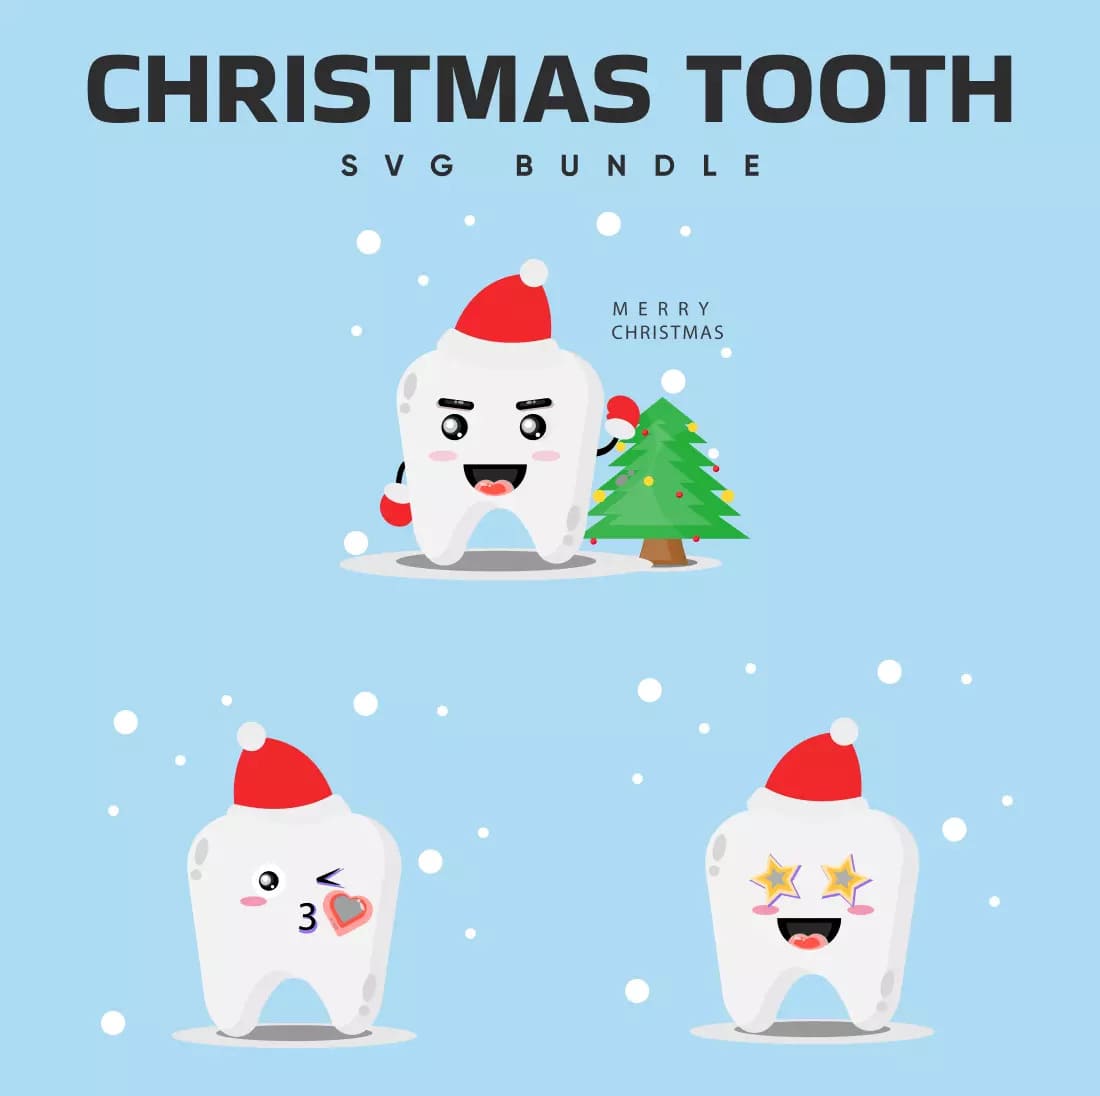 Christmas Tooth SVG Bundle Preview.